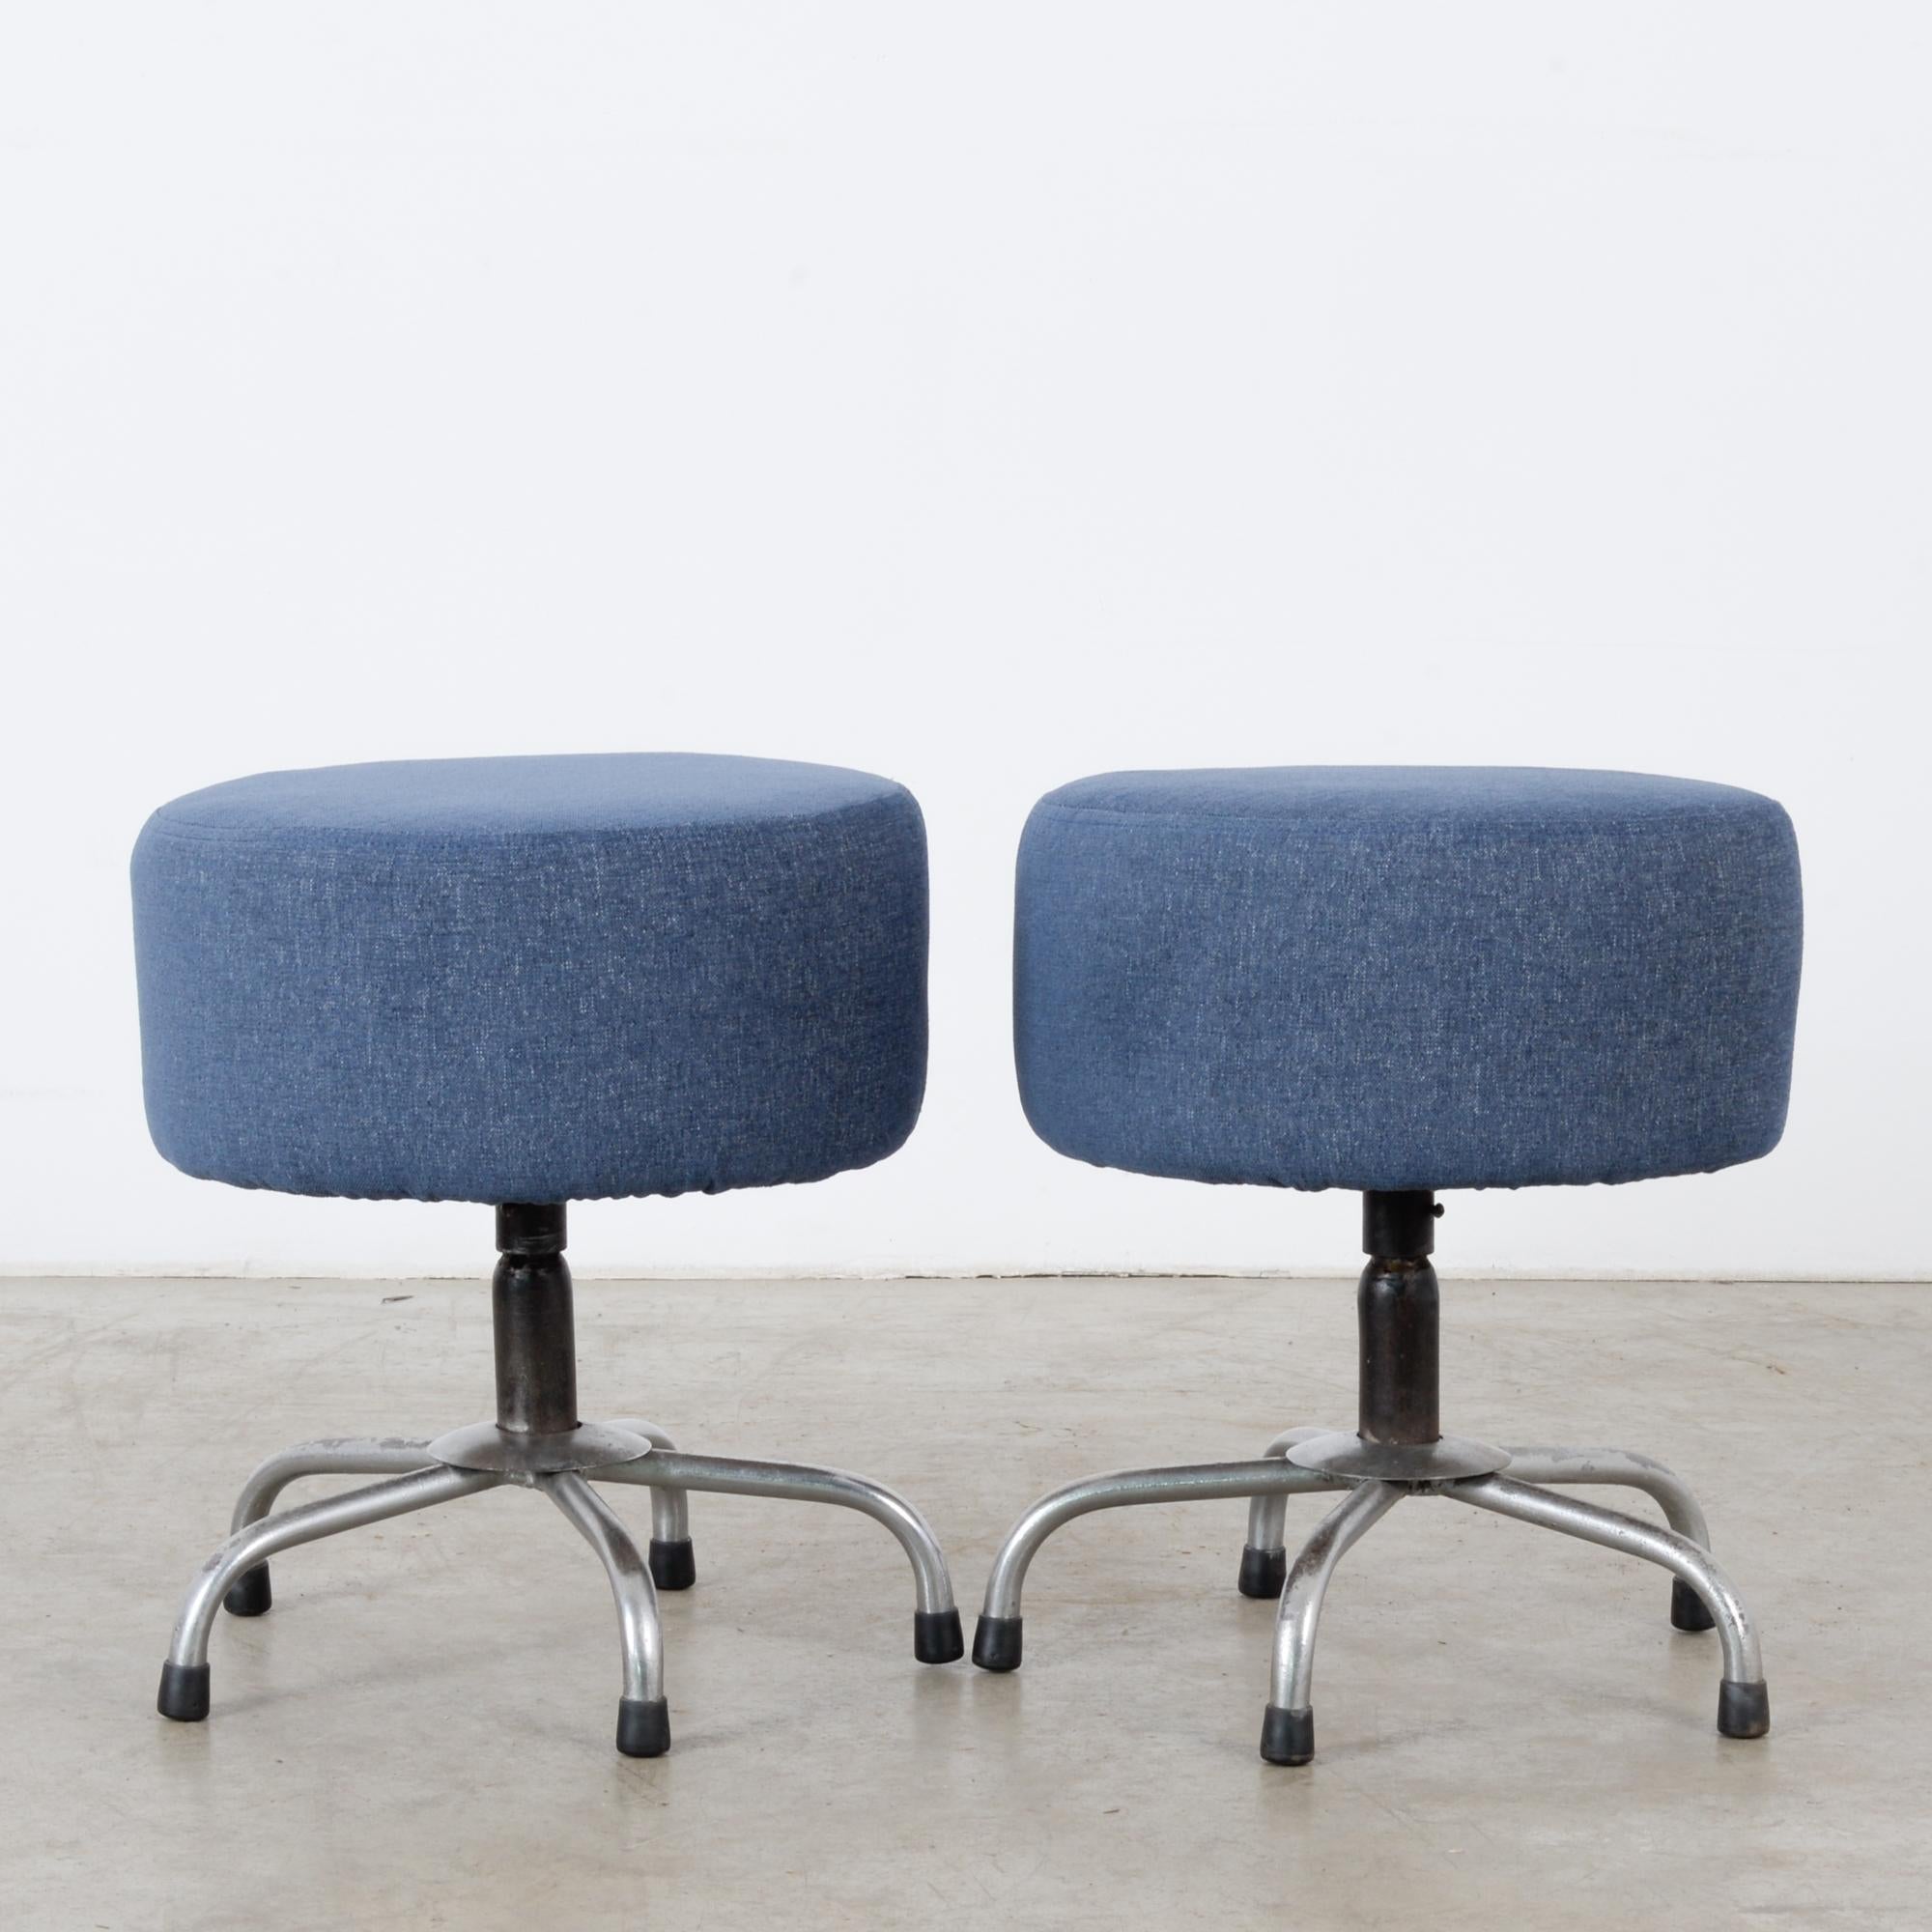 This pair of low metal stools was made in France, circa 1960, and features a comfortable bluish-gray upholstered seat. A central shaft and five curved, tubular legs fitted with black foot caps support the seats.
  